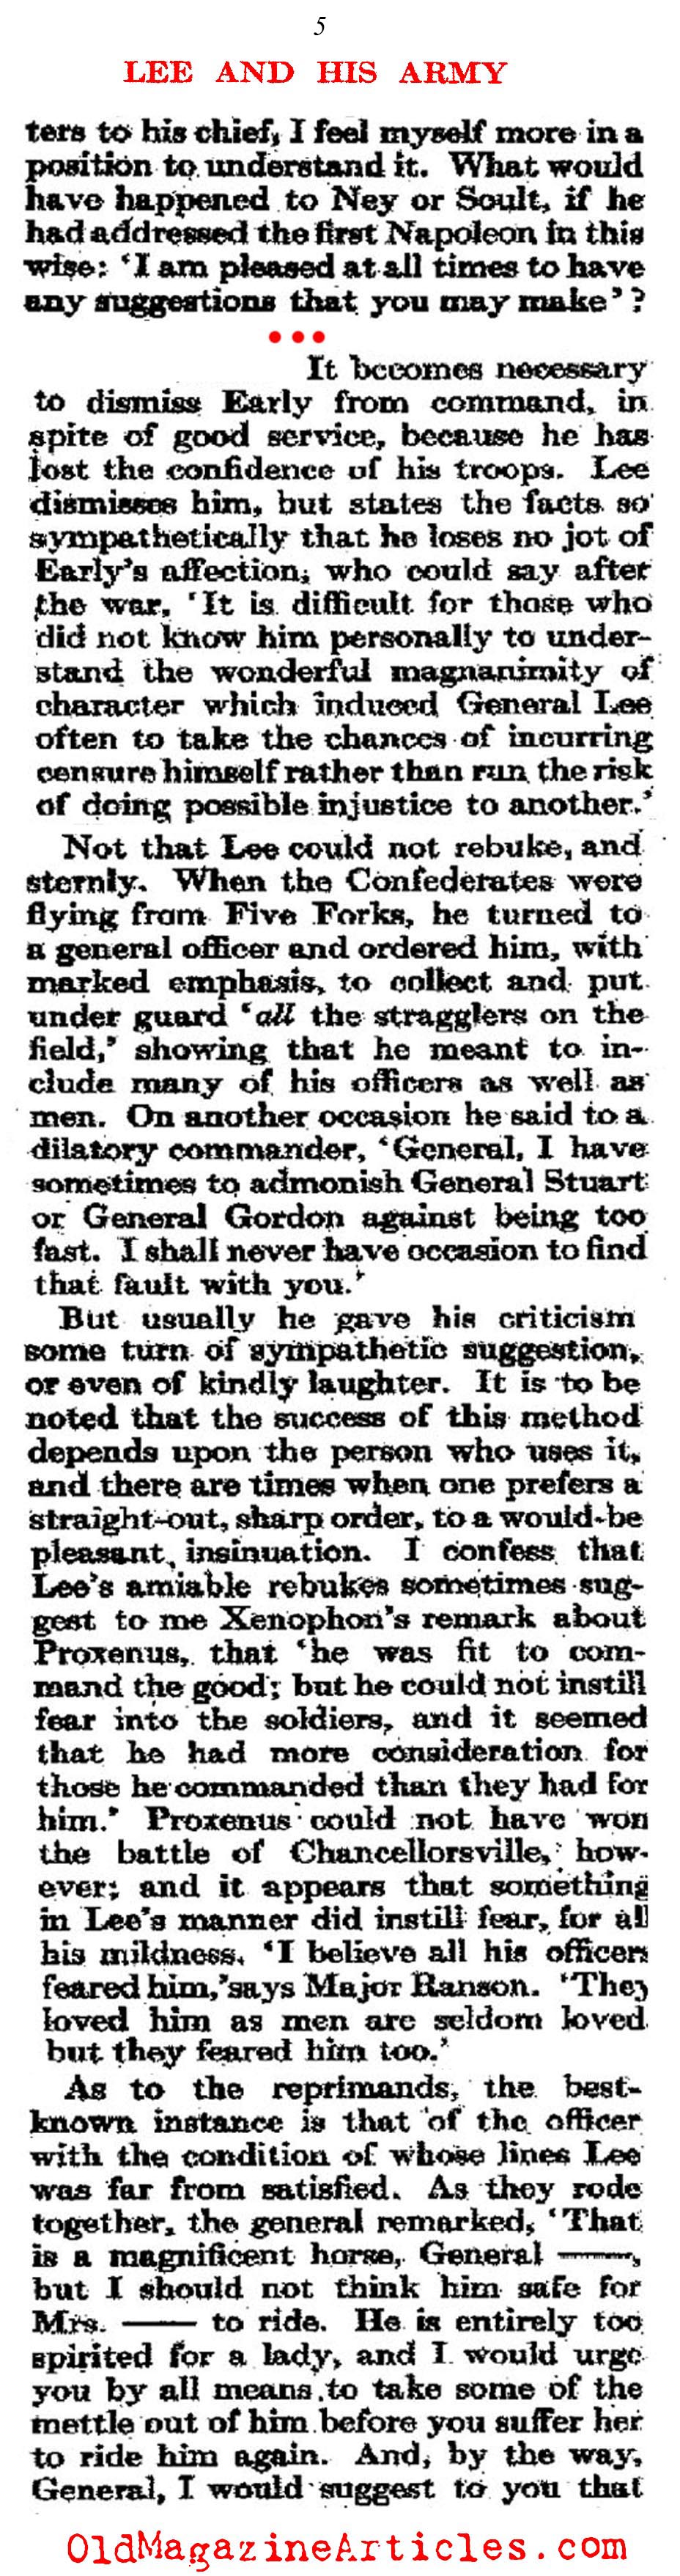 General Lee's Unique Bond with his Army  (Atlantic Monthly, 1911)